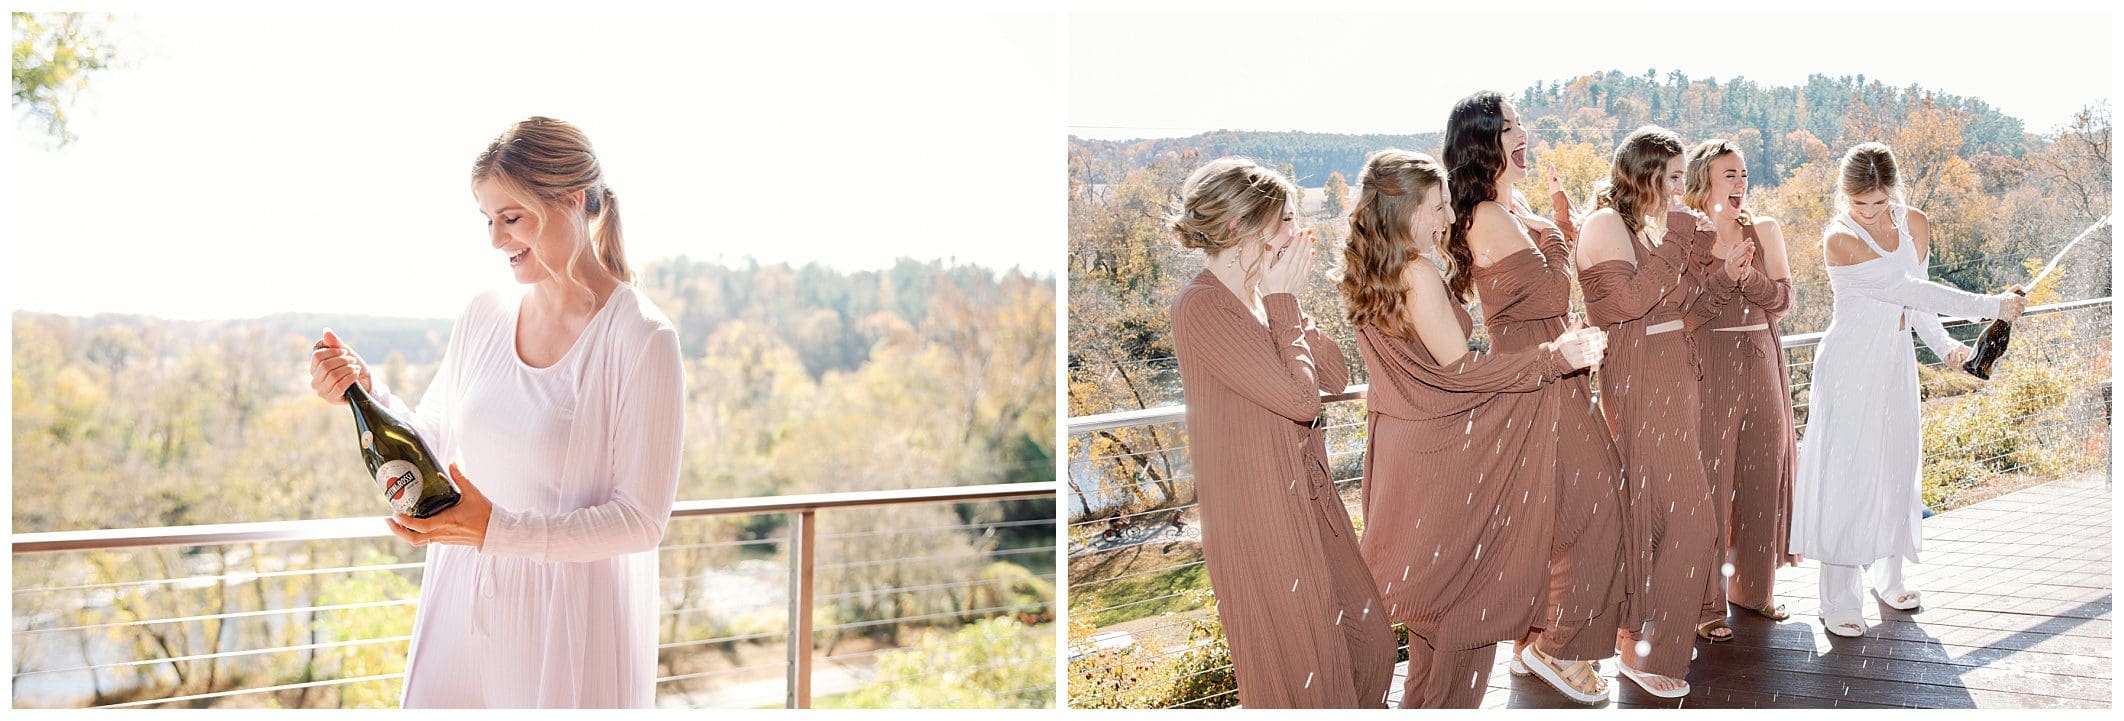 Bridesmaids holding champagne glasses on a balcony at a fall wedding at Crest Center.